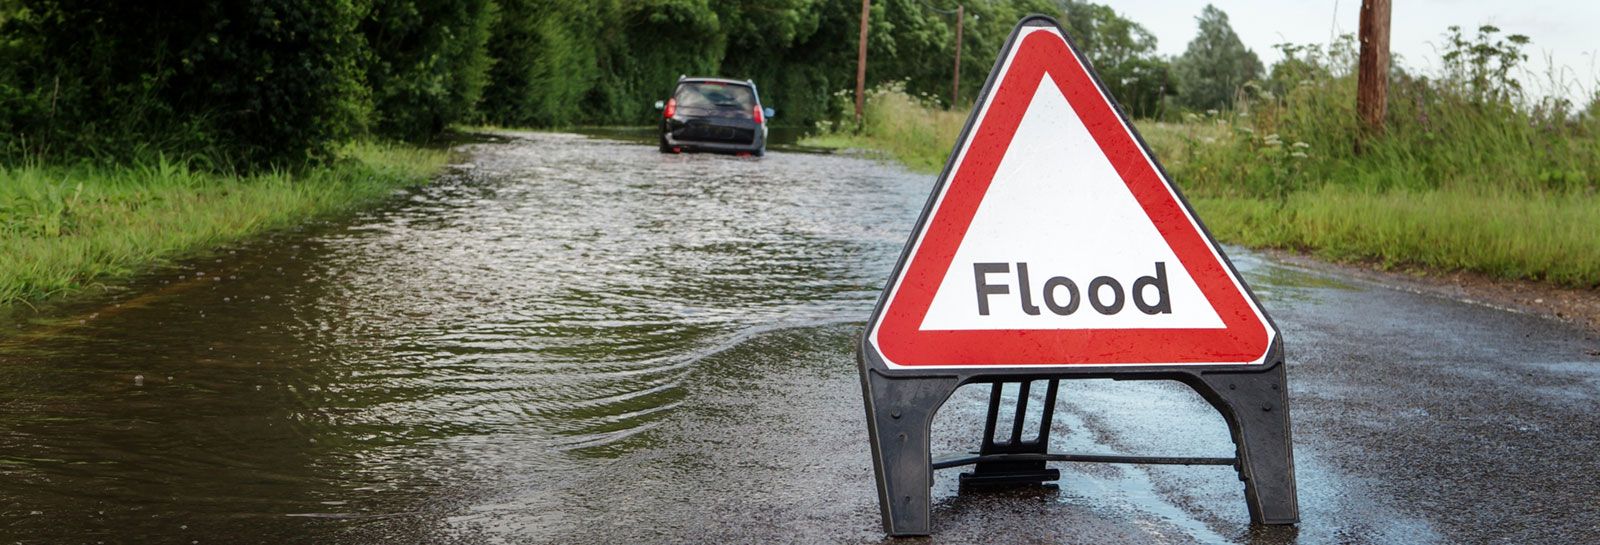 flooded road with warning sign banner image